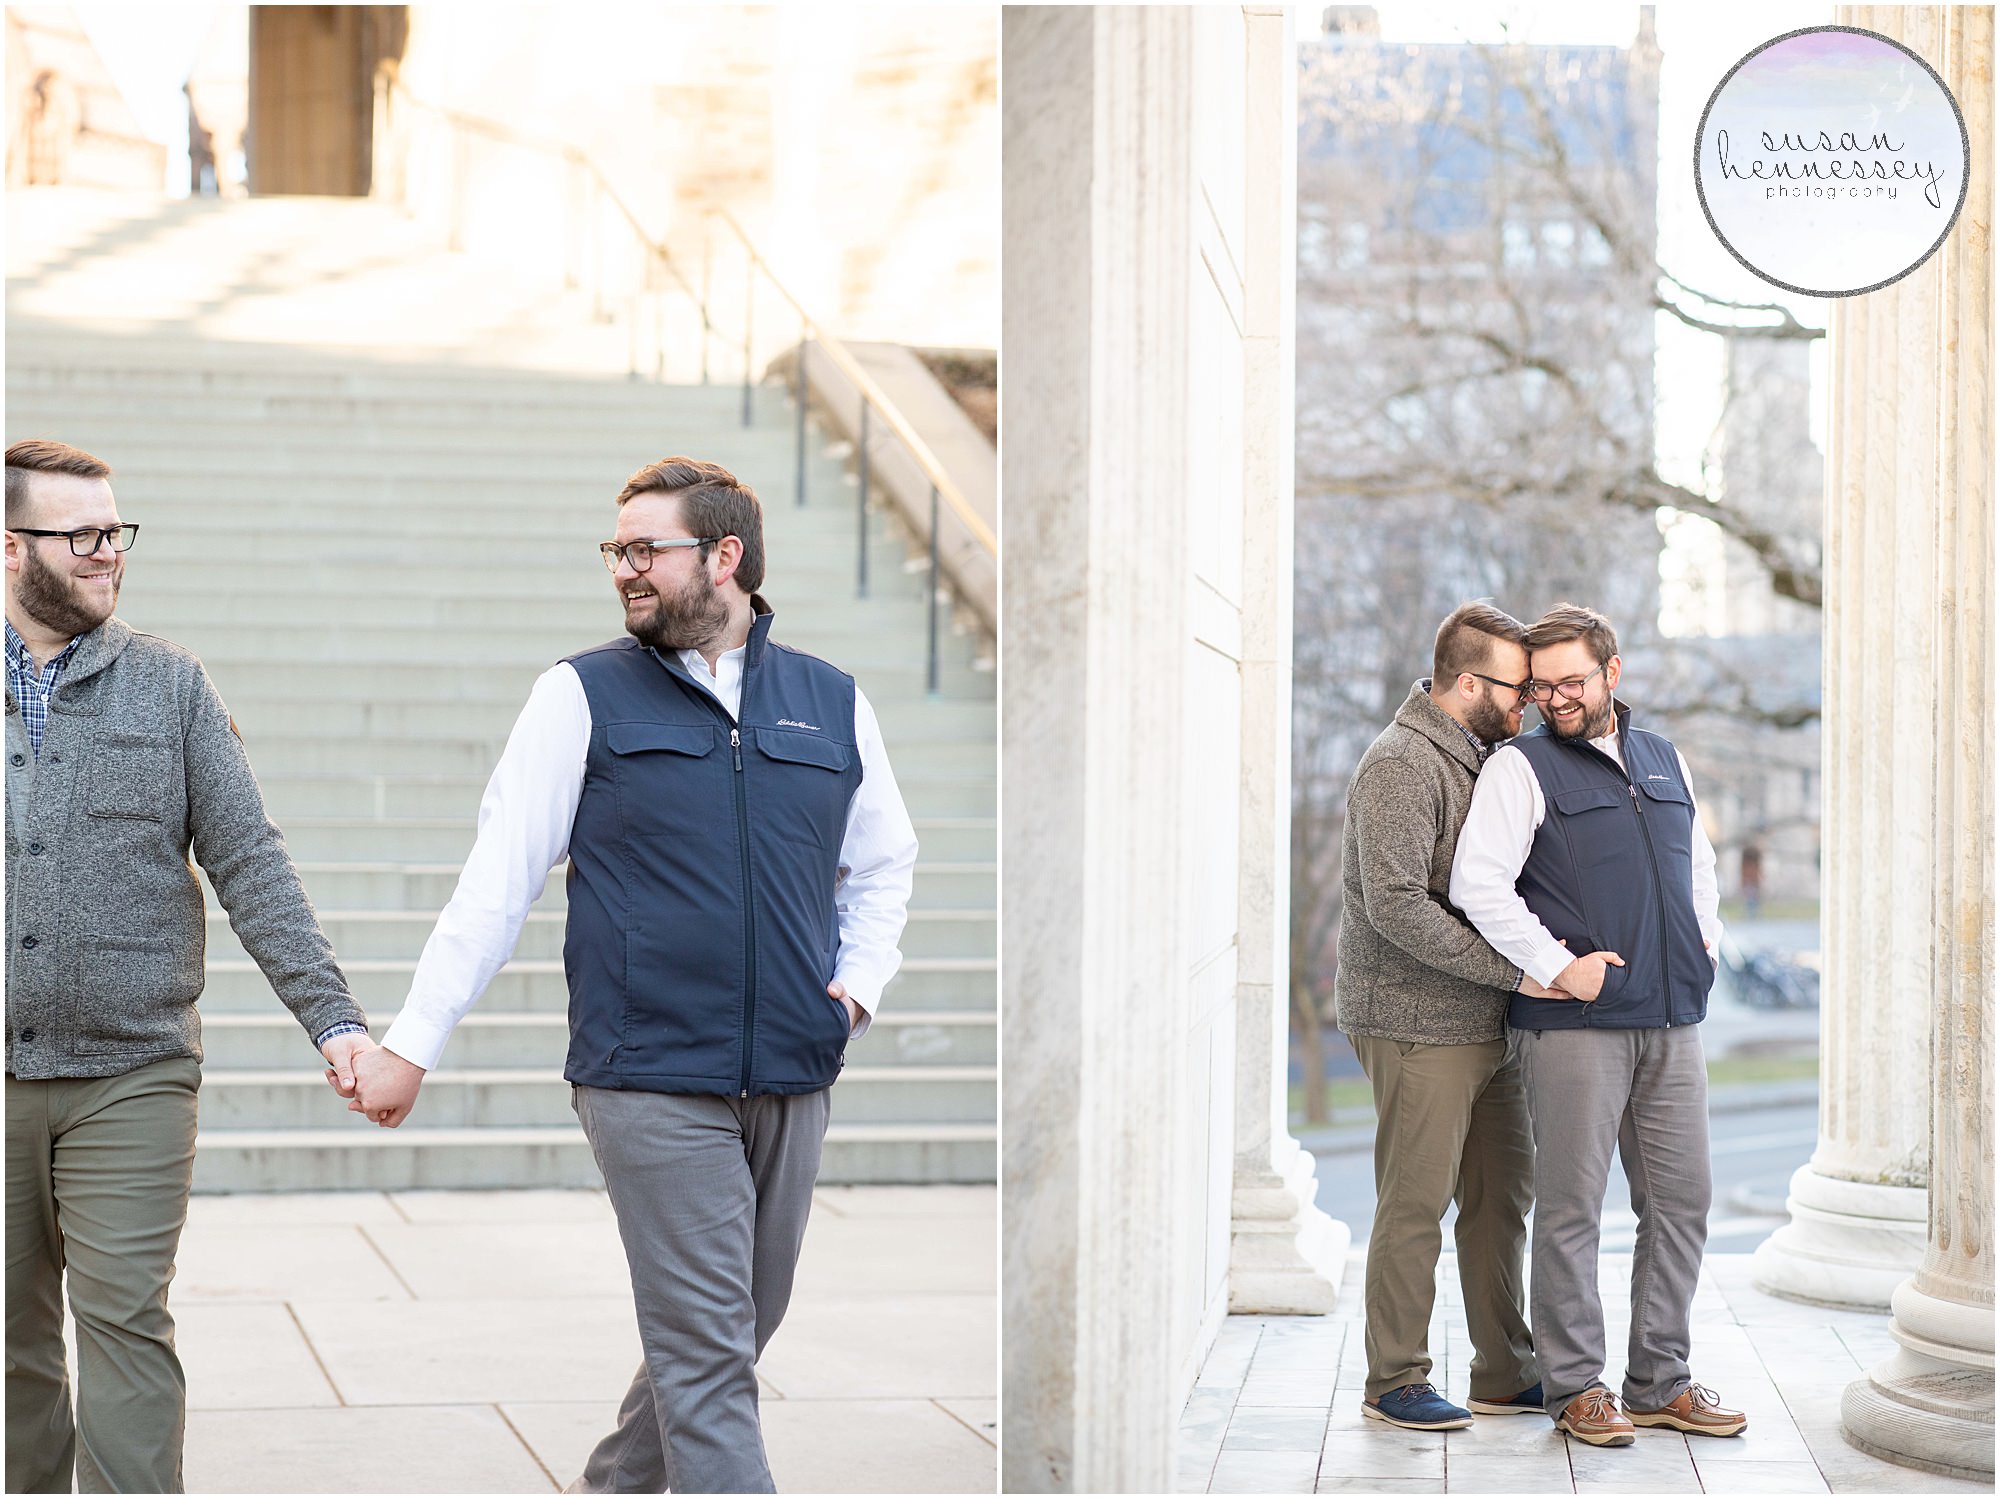 Engagement Session at Princeton University at Clio Hall